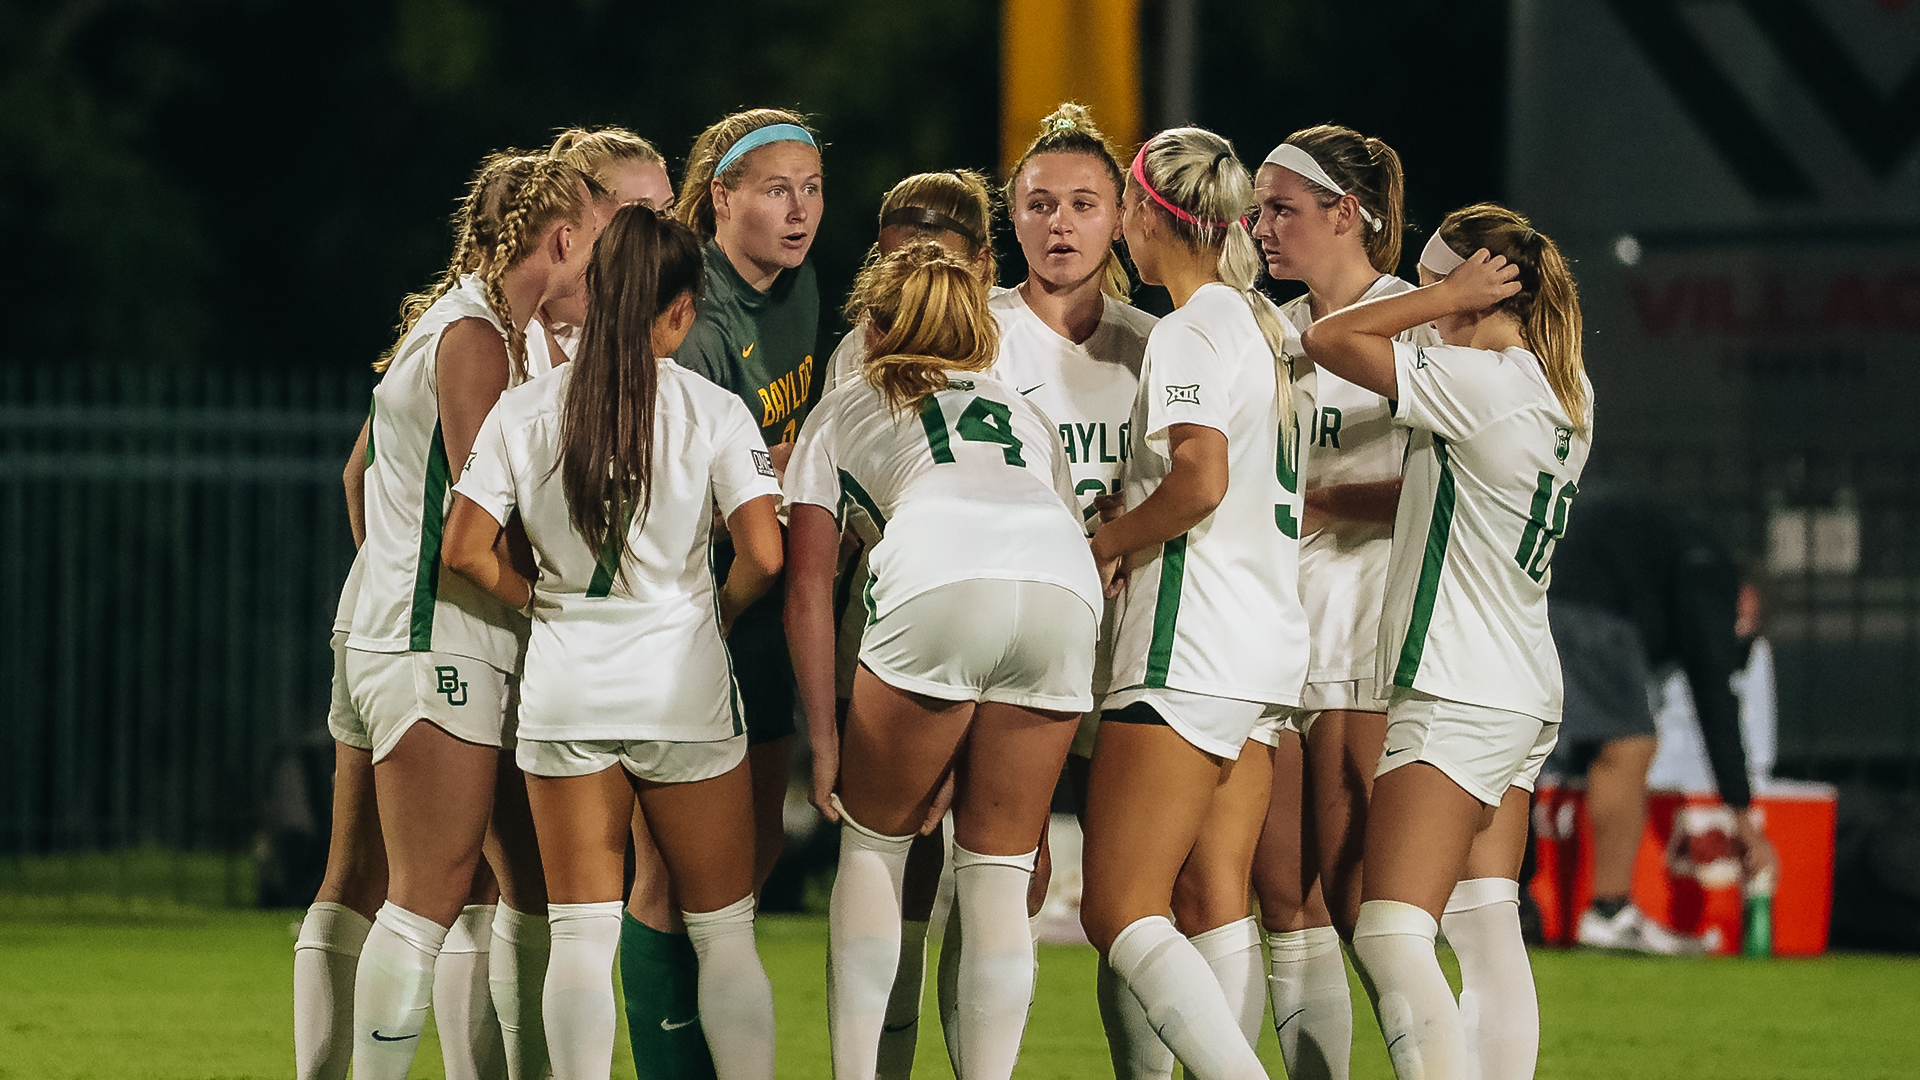 Still fighting for first win, soccer hosts another tough Big 12 team in No. 5 KU The Baylor Lariat